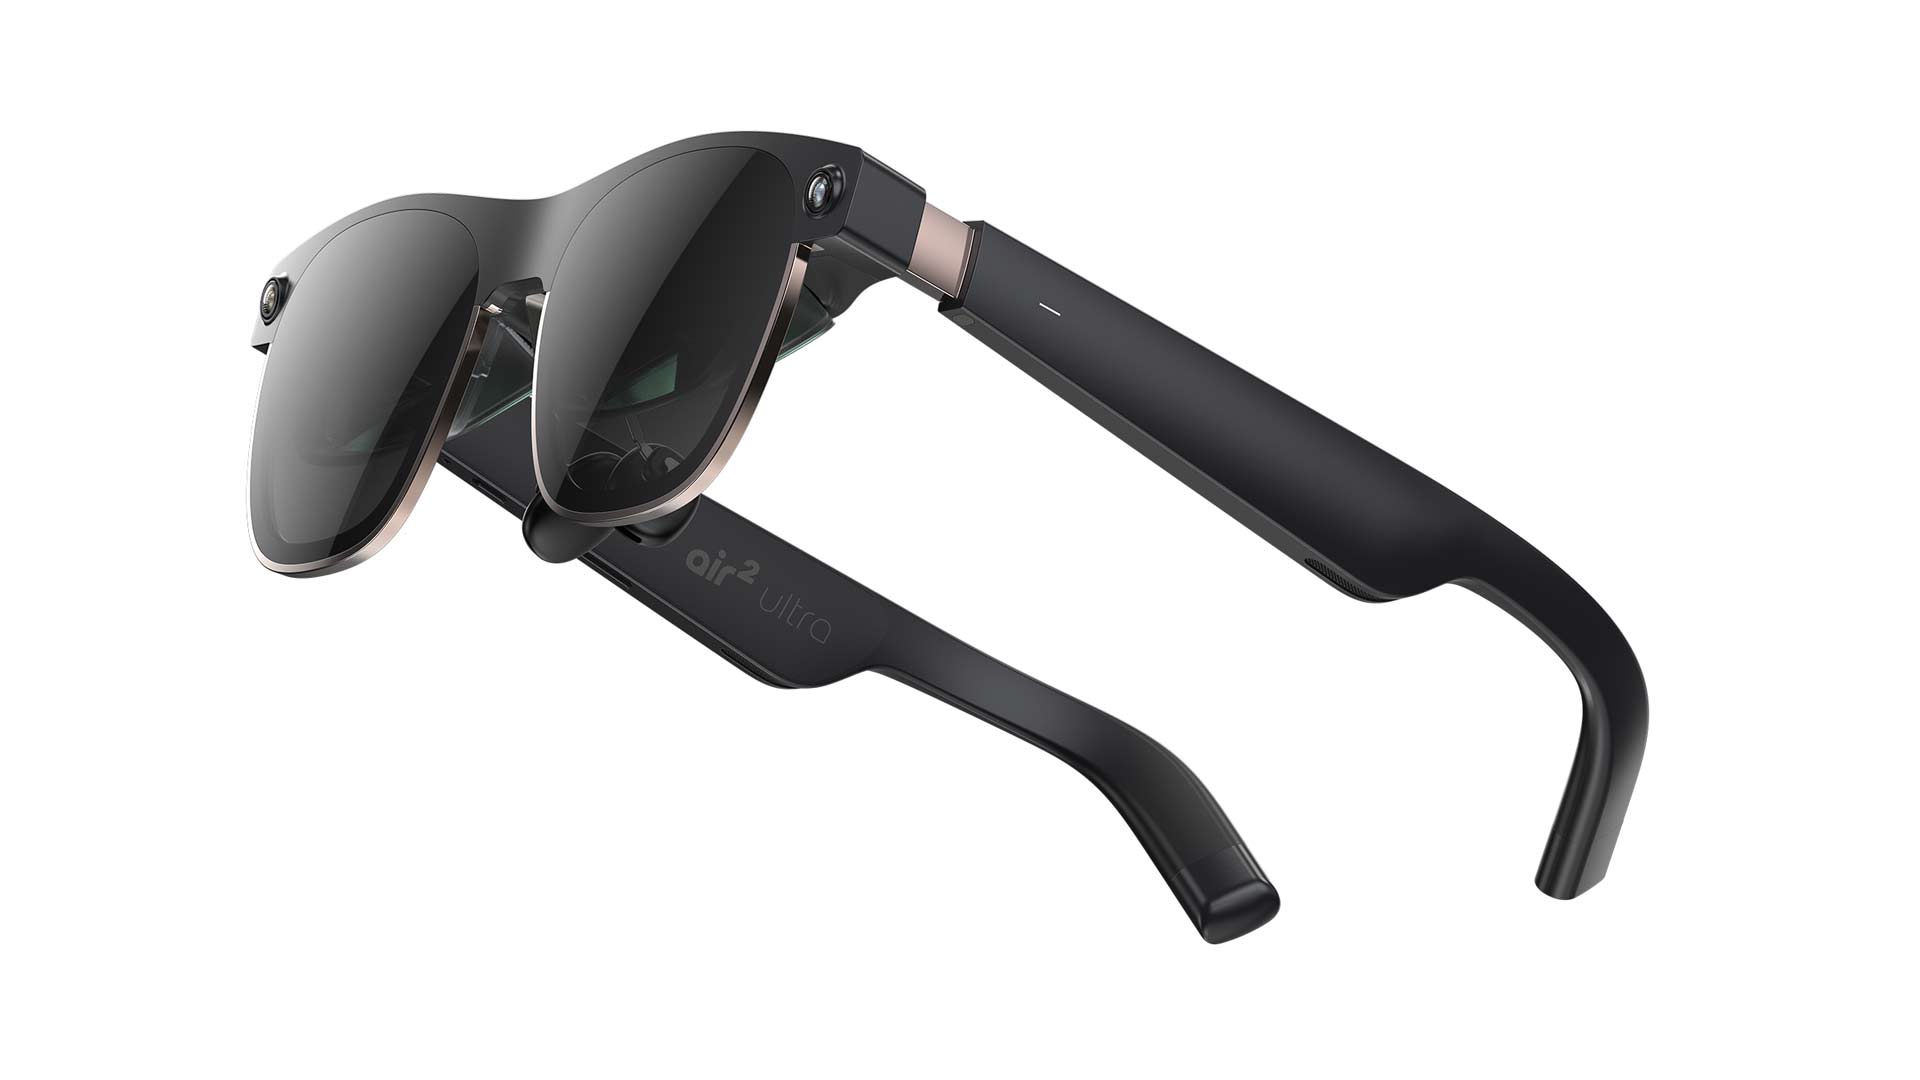 Xreal Air 2 Pro Brings Adjustable Dimming To Media Glasses